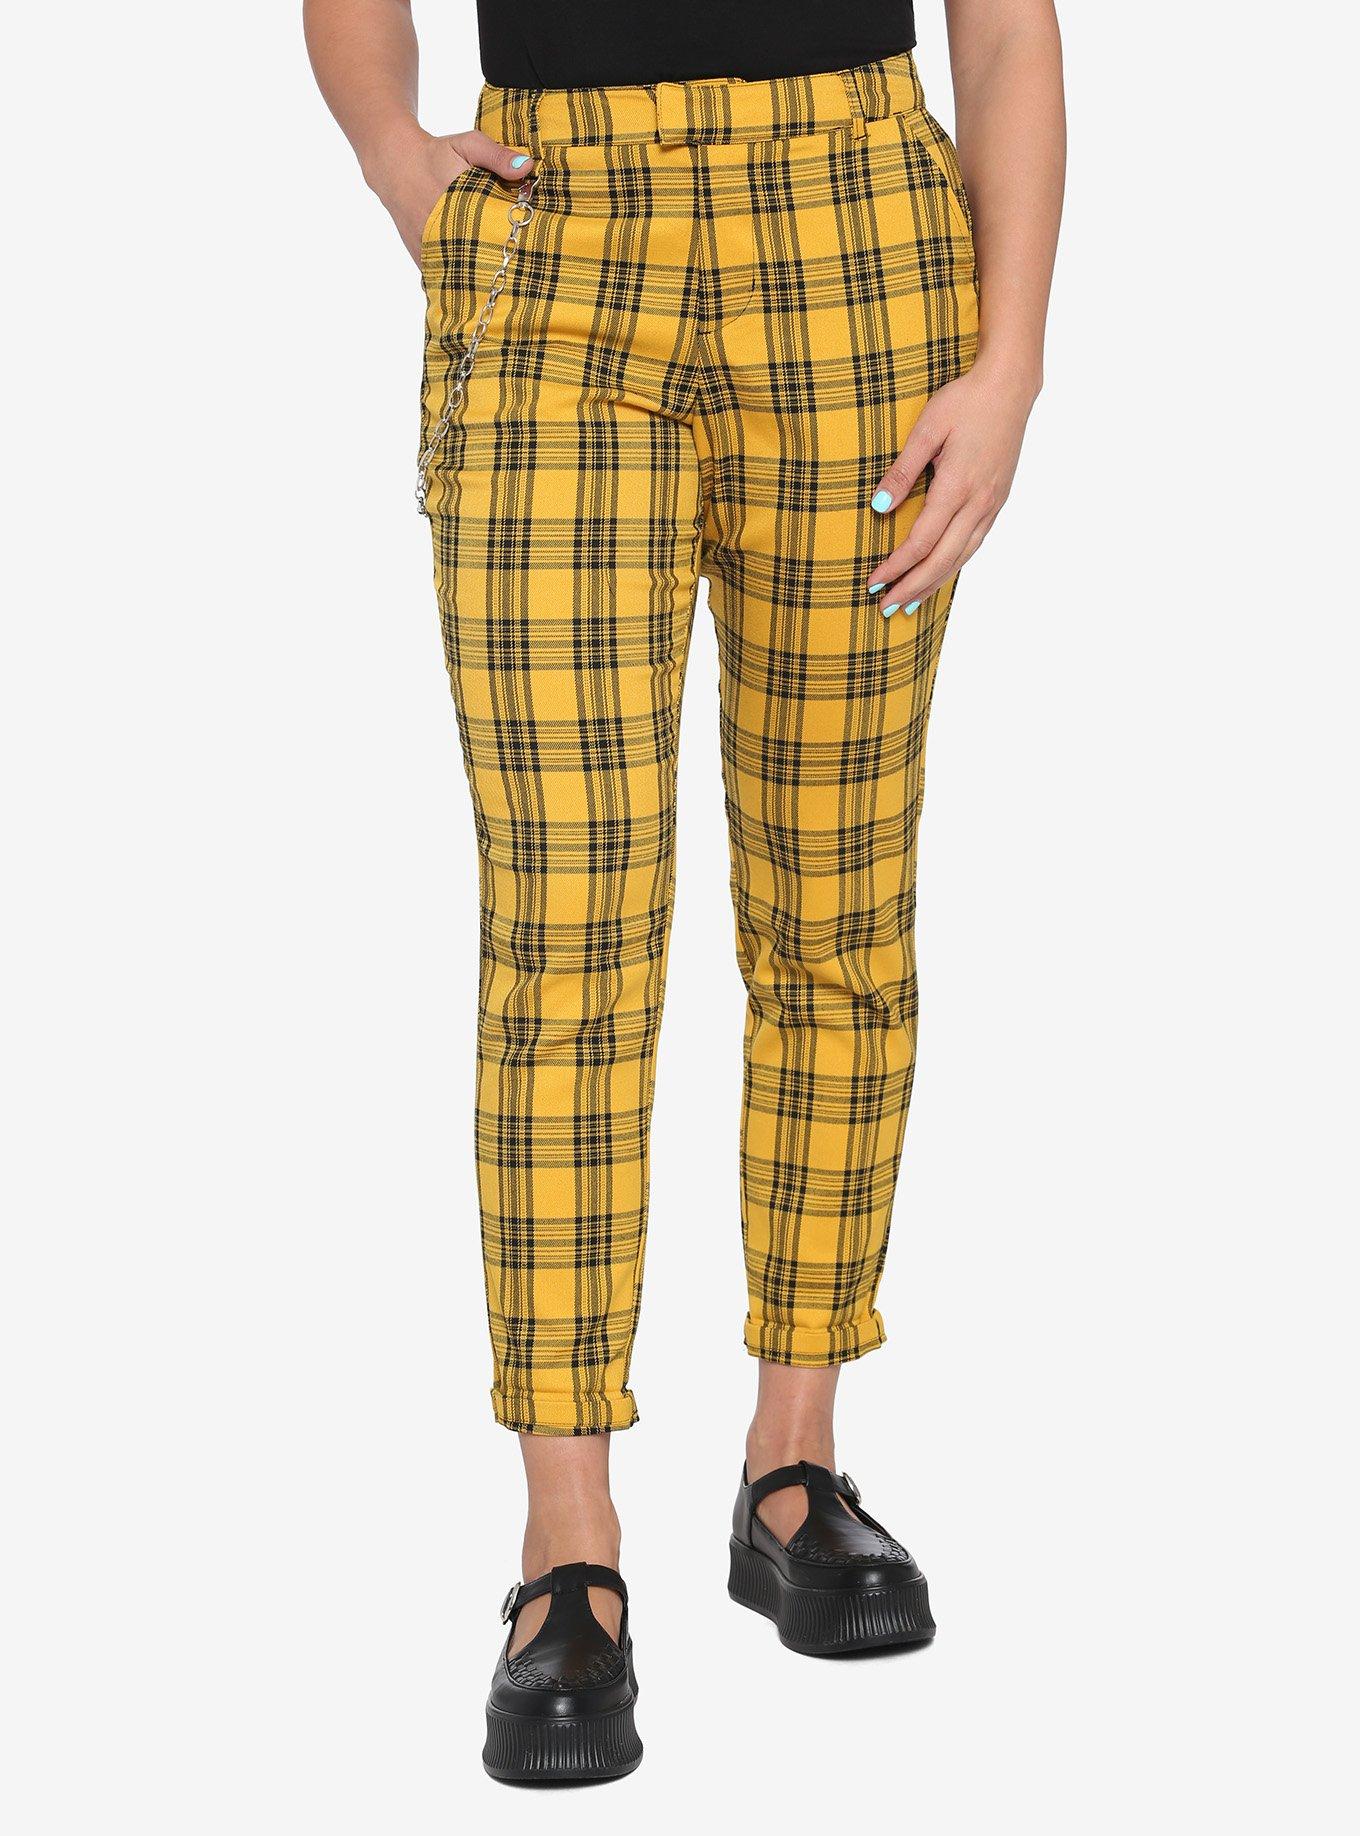 Hot Topic, Pants & Jumpsuits, Hot Topic Plaid Pants With Attached Skirt